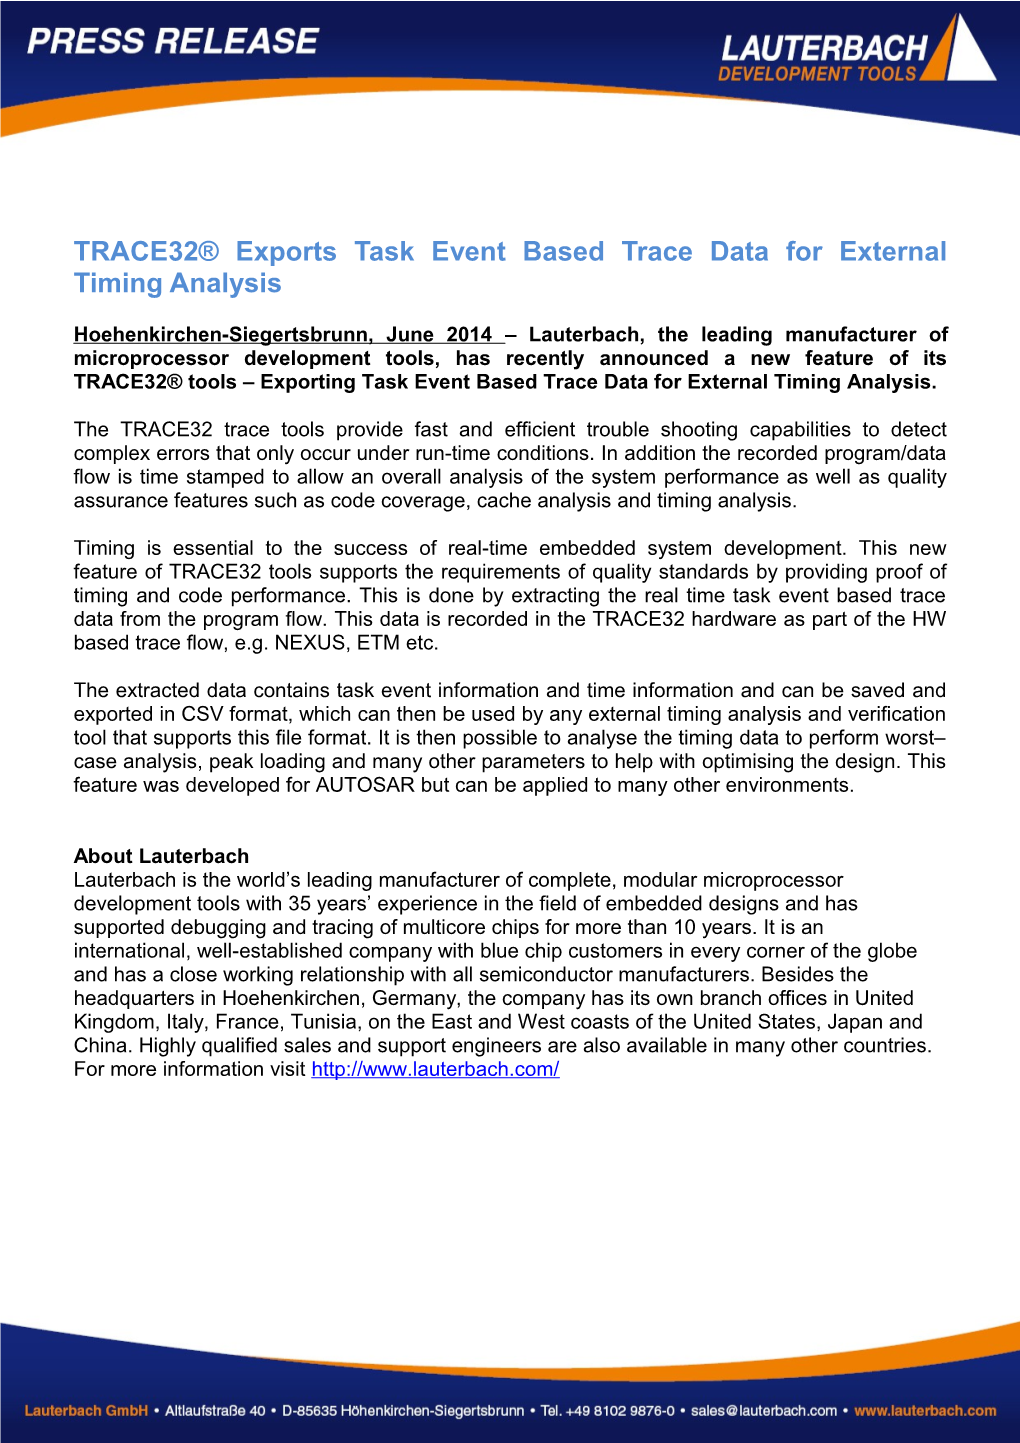 TRACE32 Exports Task Event Based Trace Data for External Timing Analysis